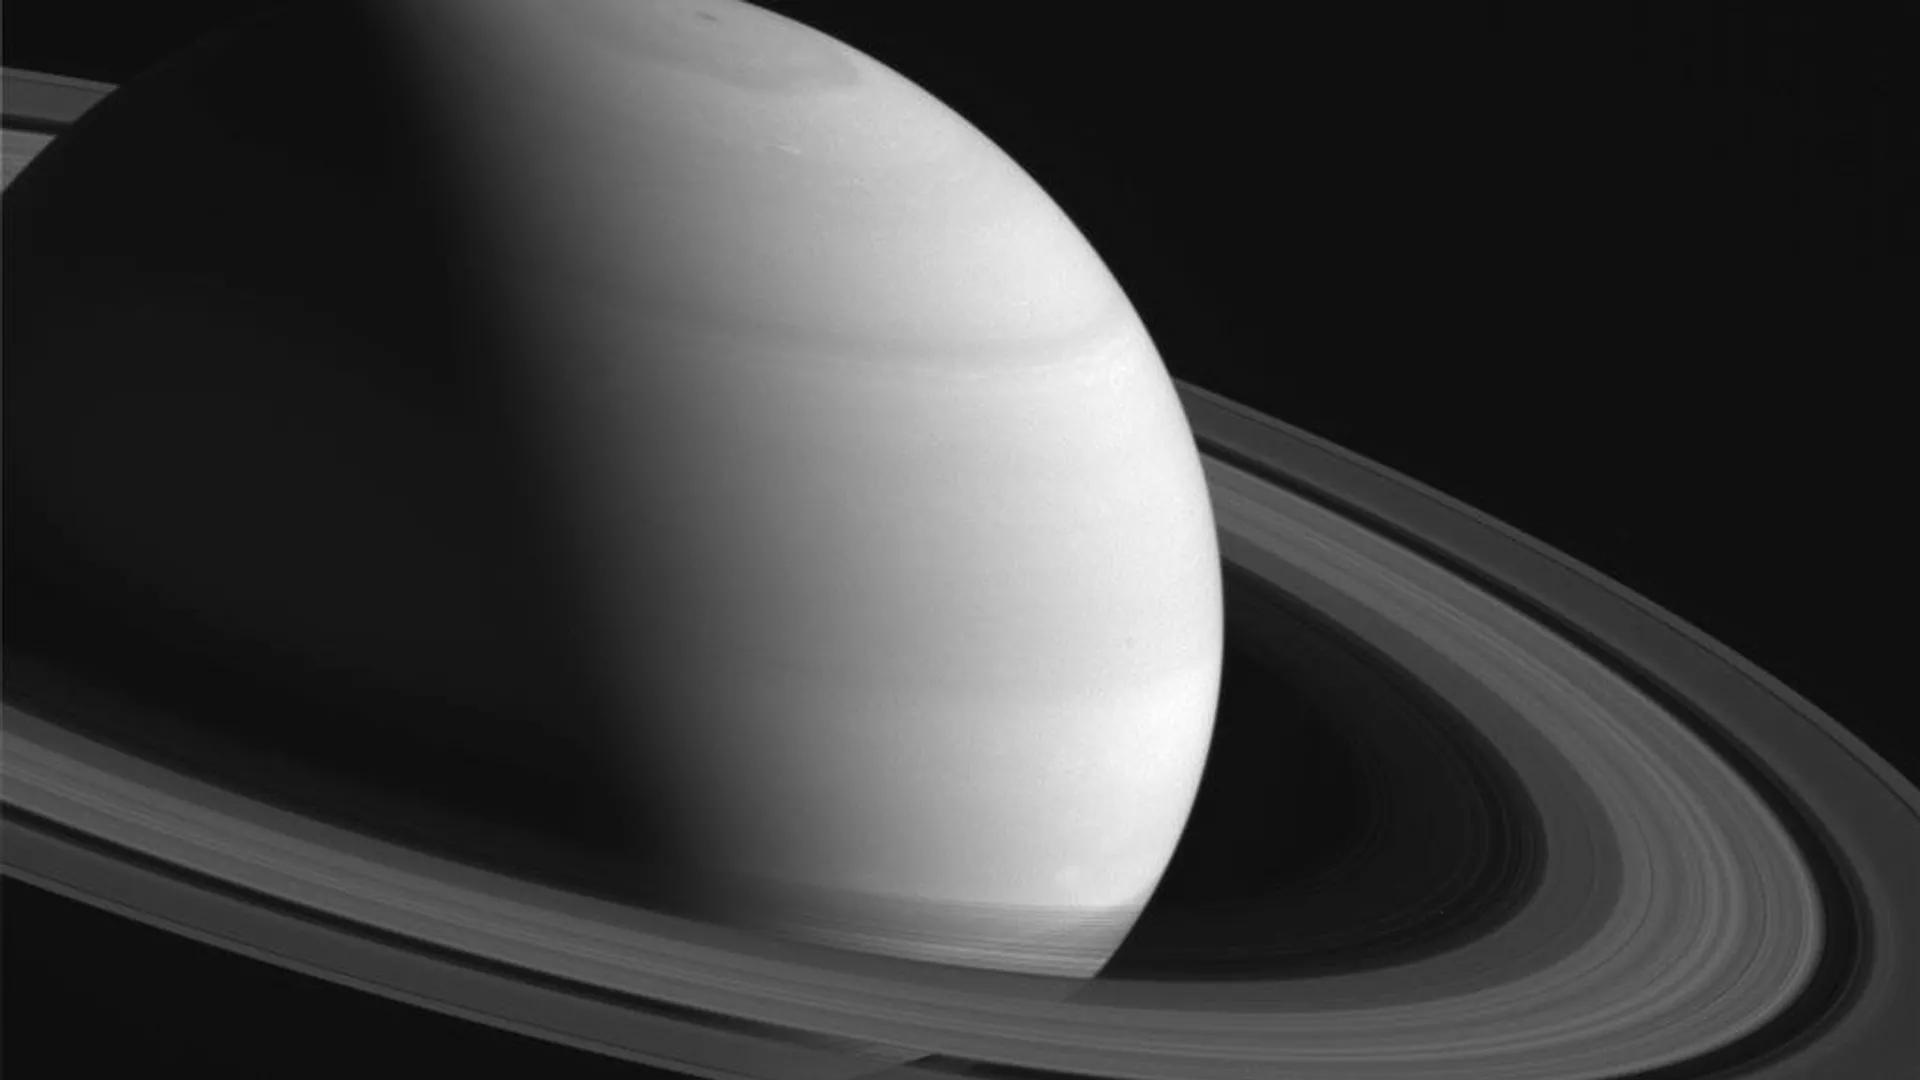 Cosmic Spring Chicken: Saturn's Rings Found to Be No Older Than 400 Million Years